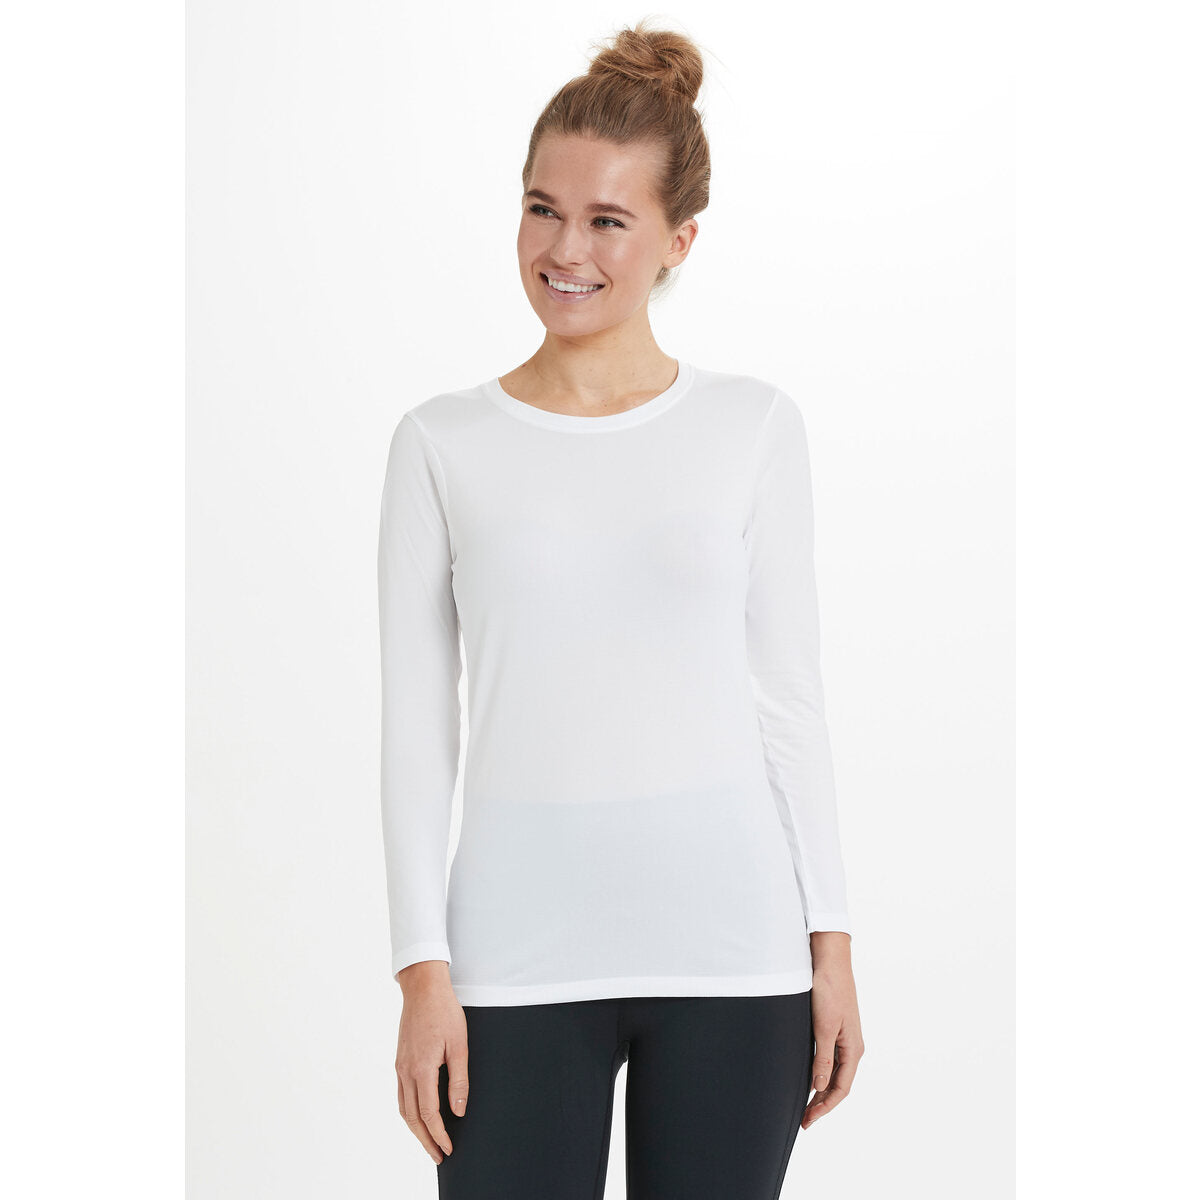 Athlecia Julee Womenswear Loose Fit Long Sleeve Seamless Tee - White 1 Shaws Department Stores